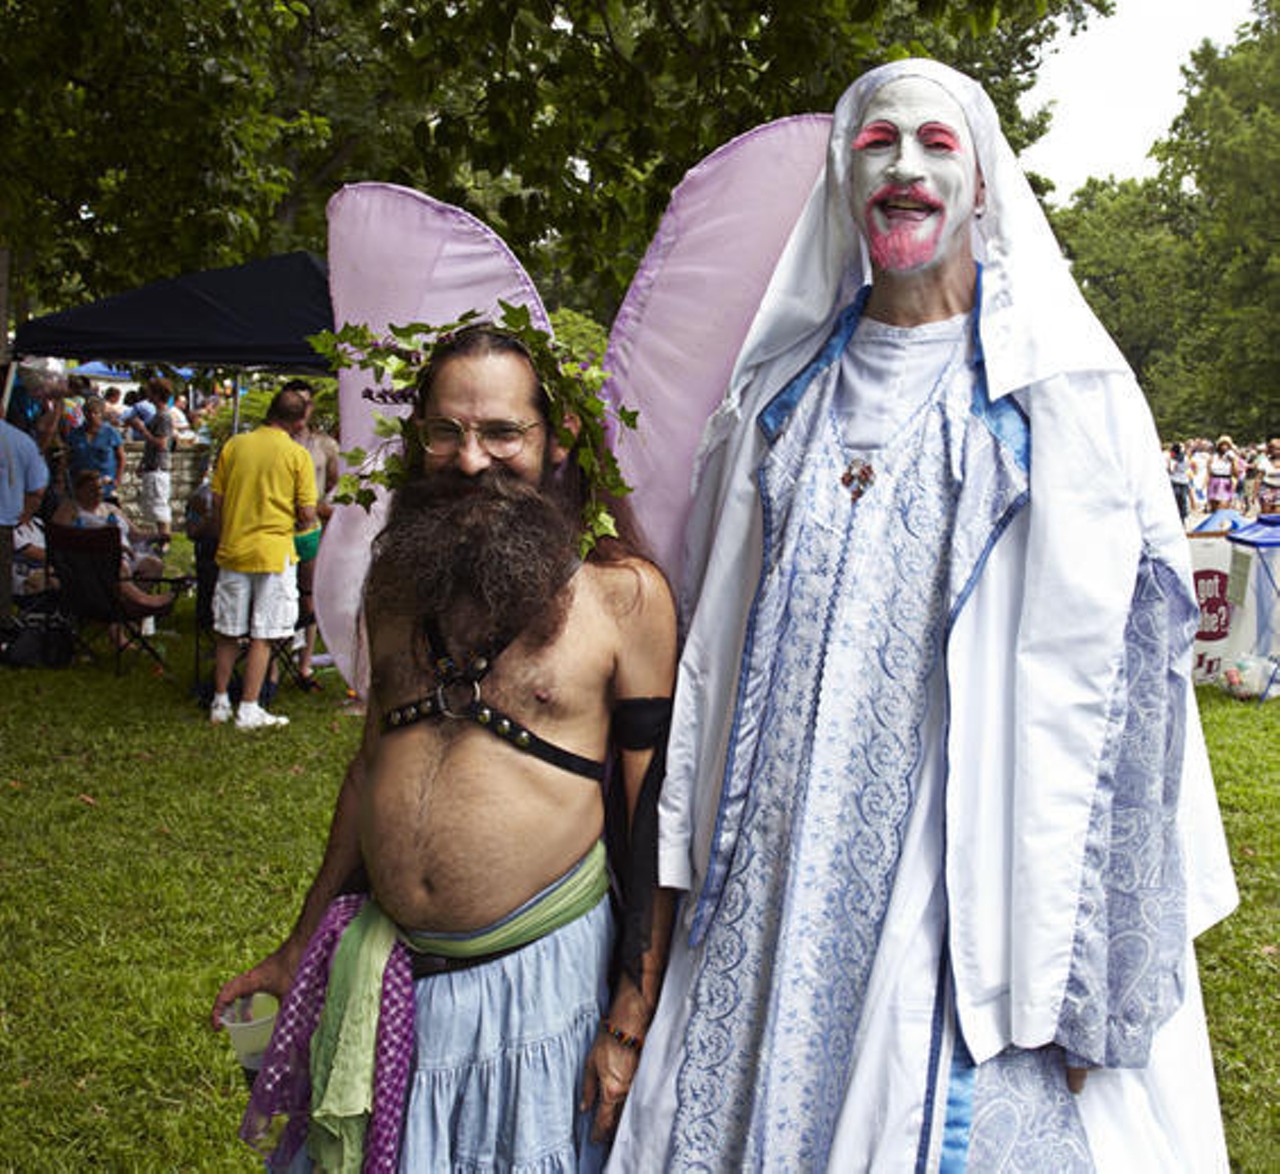 Two attendees of St. Louis Pride Festival on June 27. See more photos from the 2010 St. Louis pride festival.